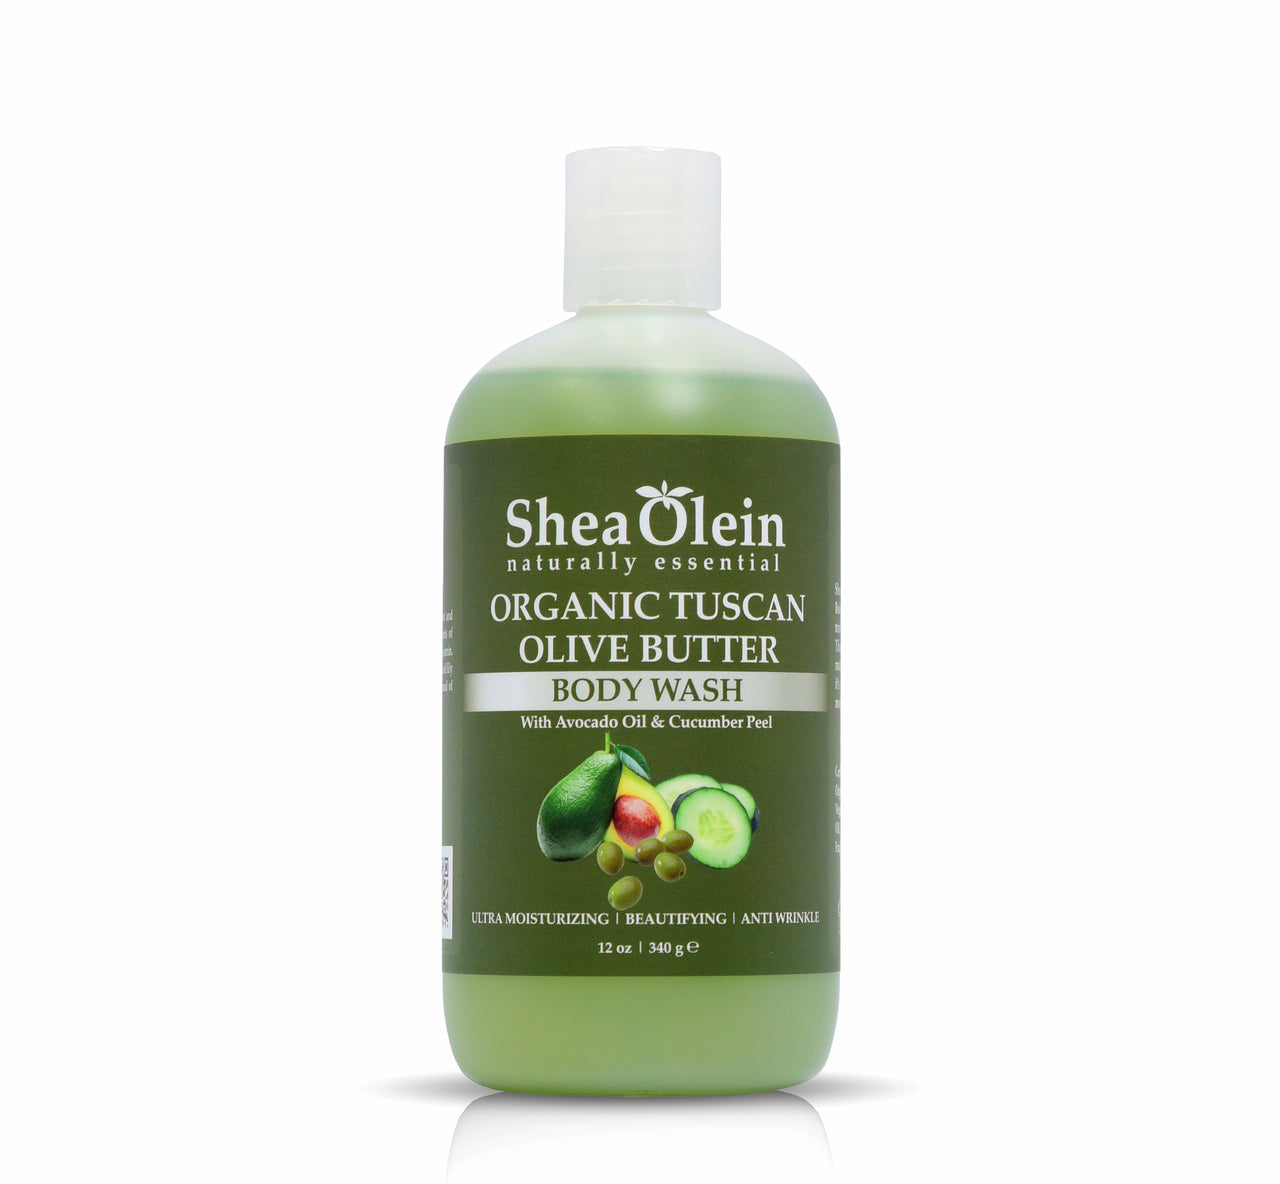 Organic Tuscan Olive Butter Body Wash with Avocado Oil & Cucumber Peel 12oz